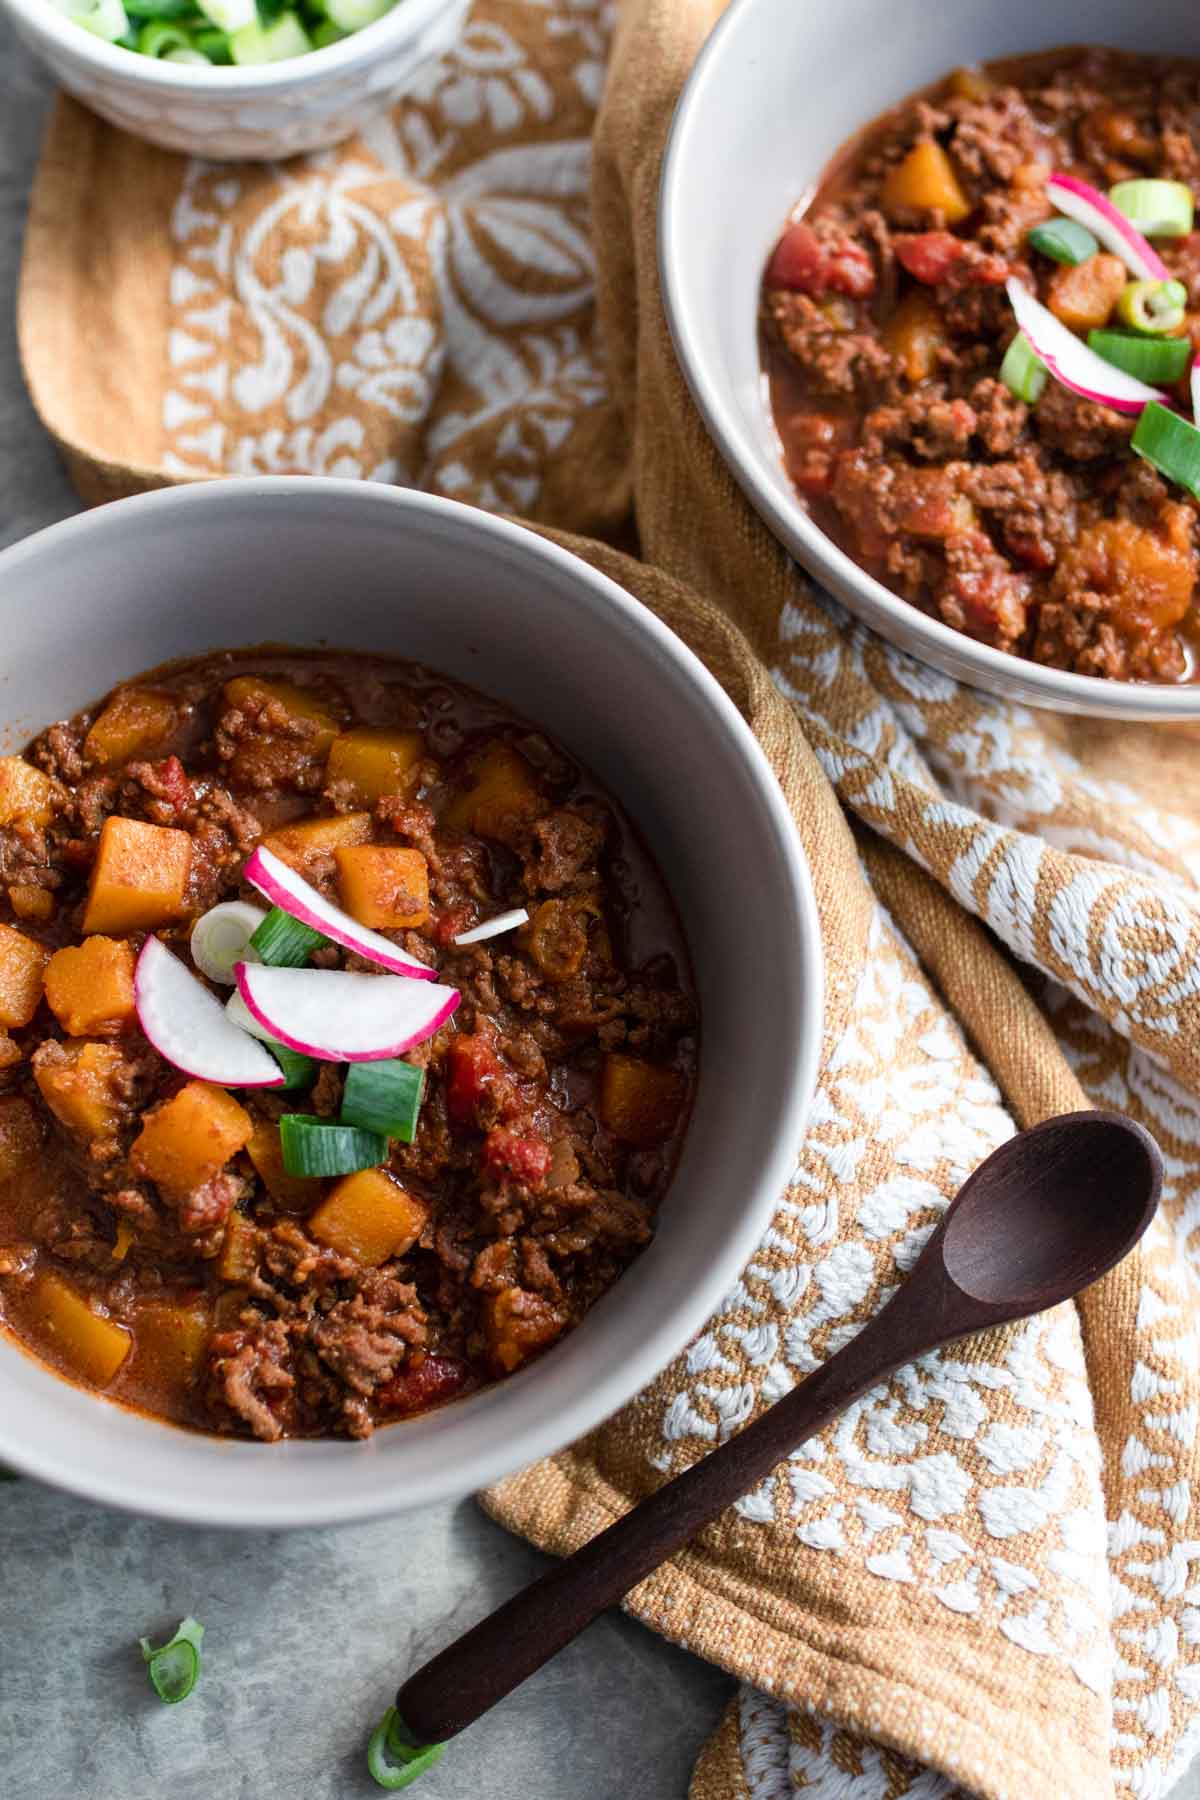 Bowls of chili without beans loaded with toppings.